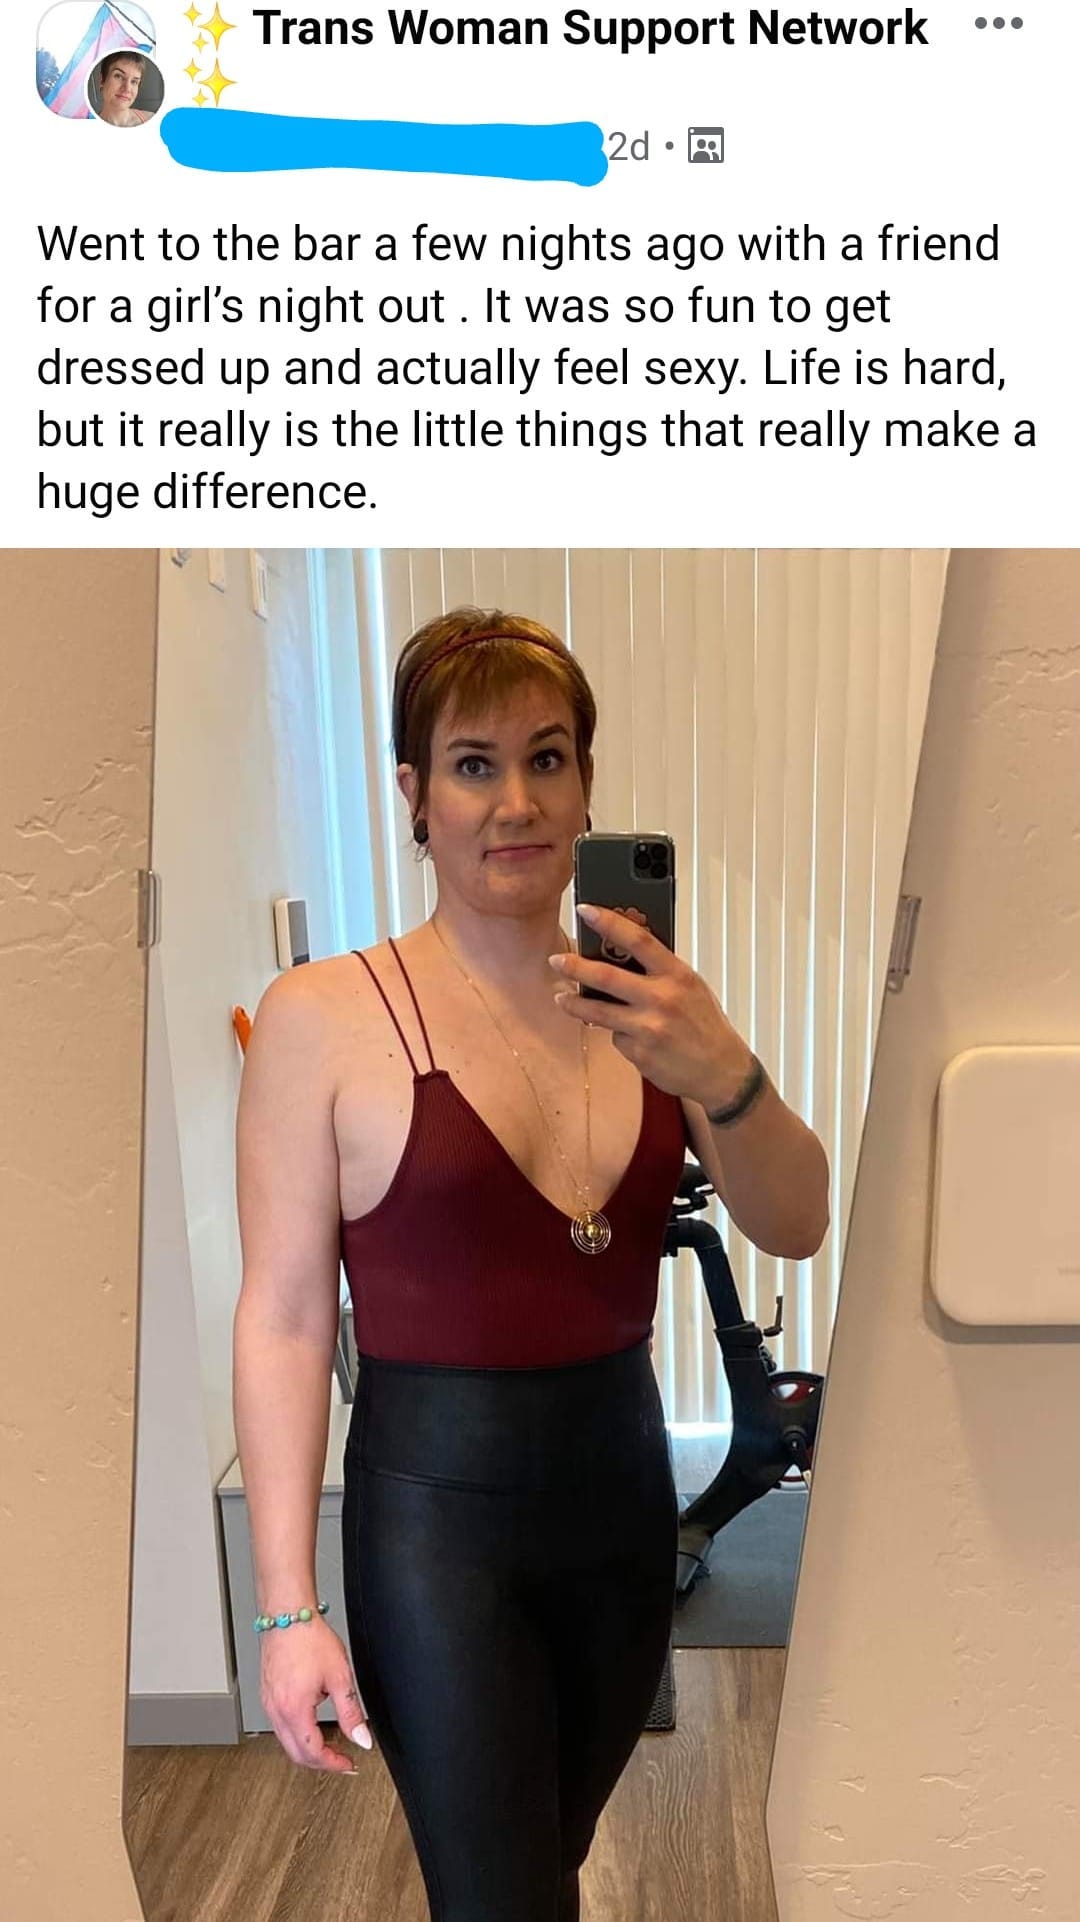 May be an image of 1 person, jewelry and text that says 'Trans Woman Support Network 2d Went to the bar a few nights ago with a friend for a girl's night out It was so fun to get dressed up and actually feel sexy. Life is hard, but it really is the little things that really make a huge difference.'